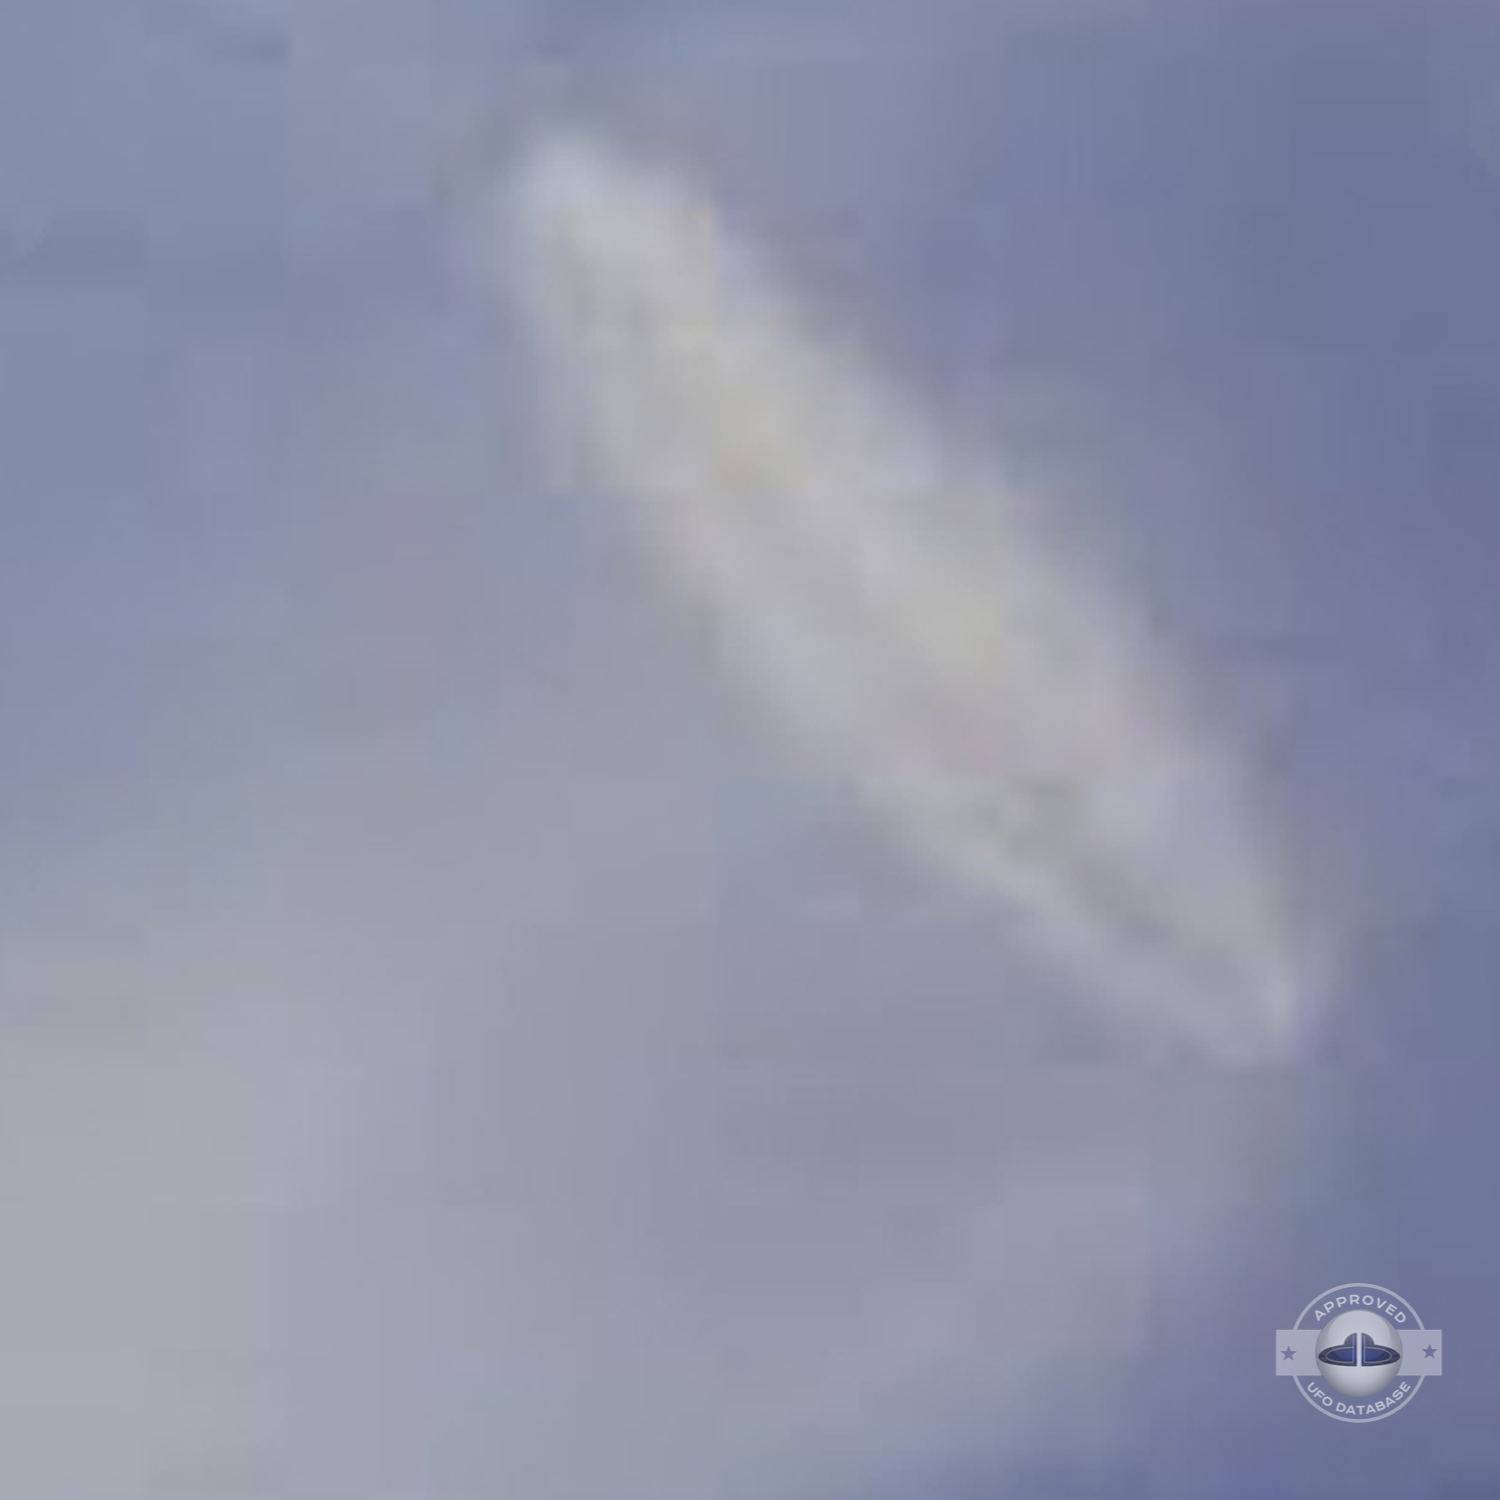 UFO almost sideways over buildings leaving a white gaseous trail 1957 UFO Picture #124-4